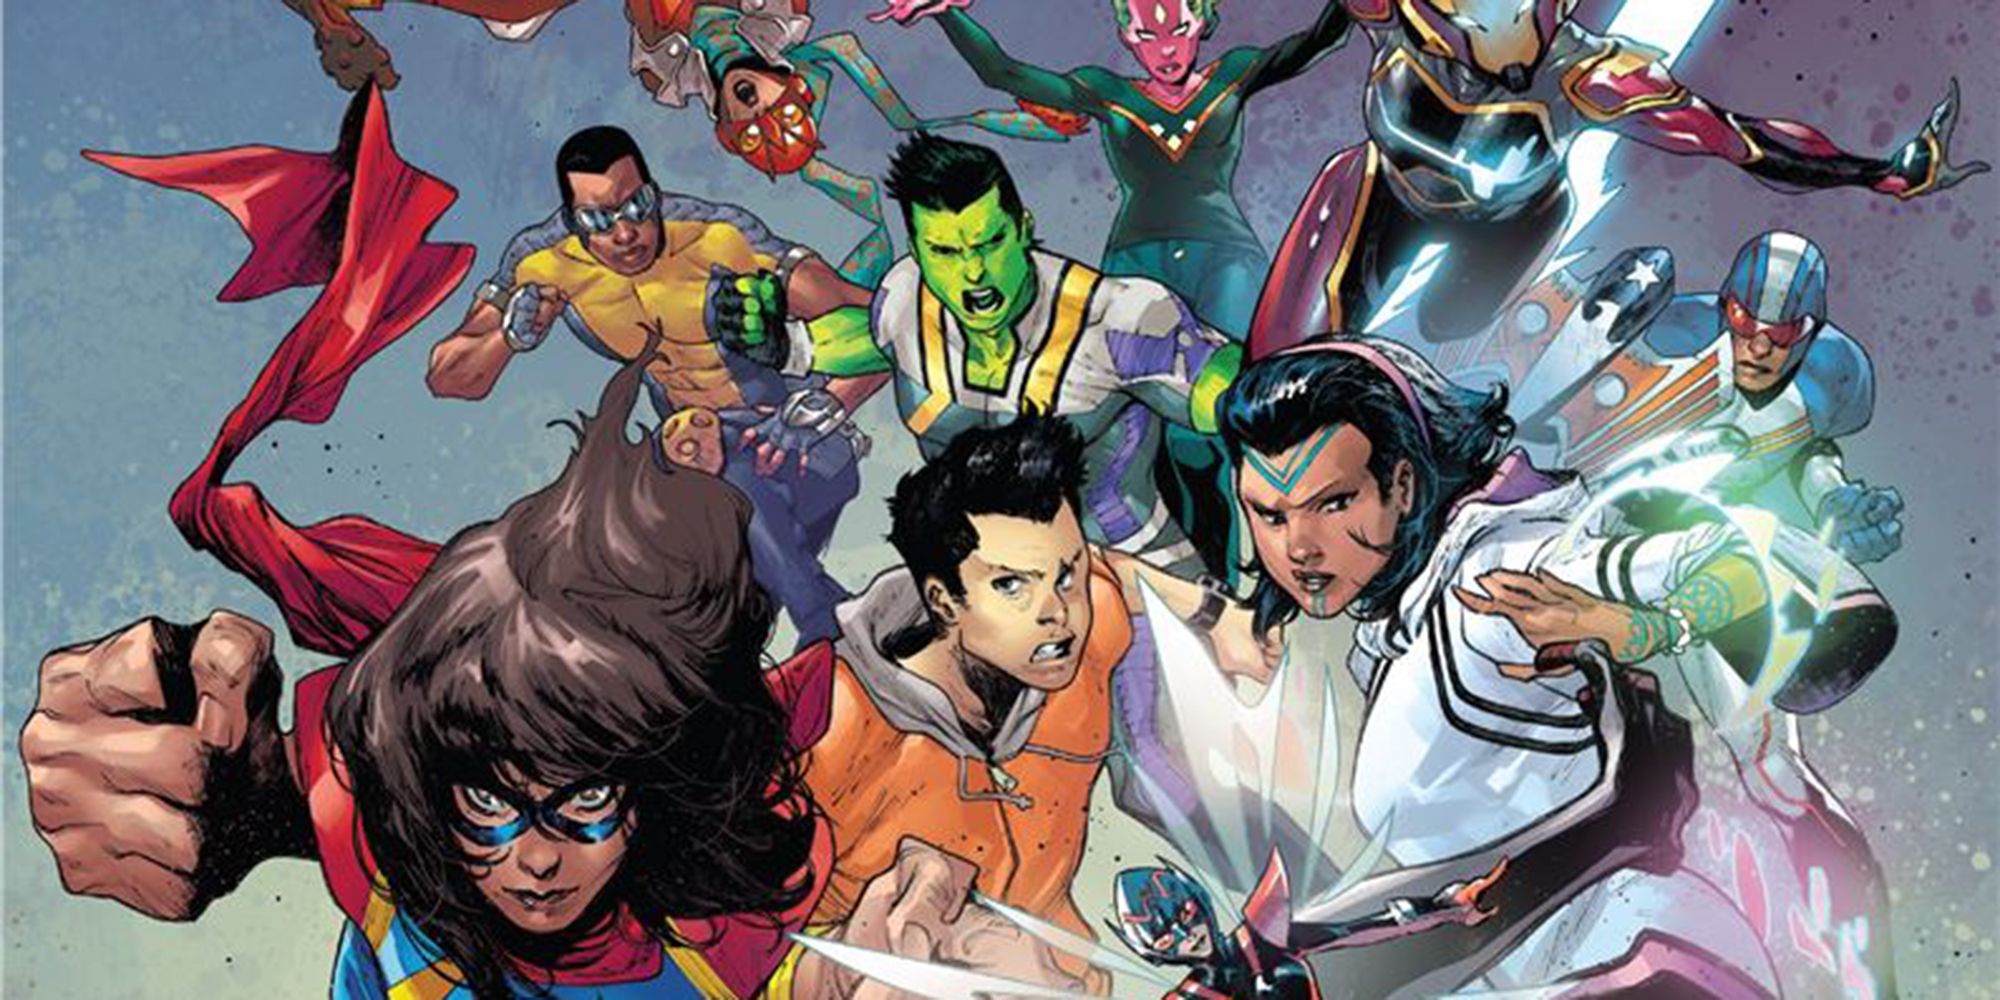 Marvel's Champions Team Has a Reserve Roster of Superheroes CBR